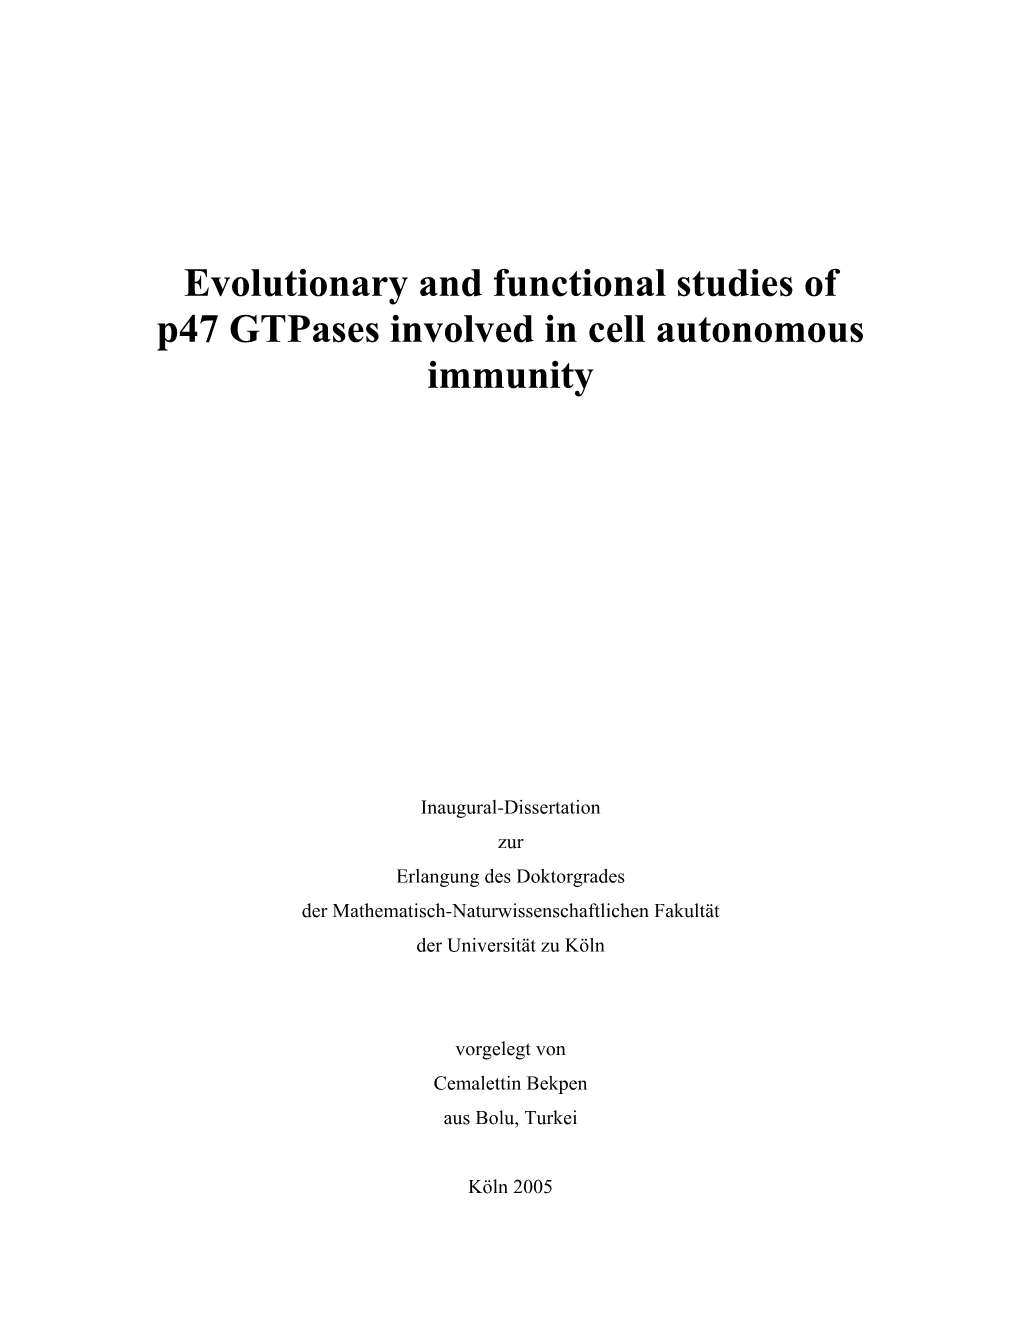 Evolutionary and Functional Studies of P47 Gtpases Involved in Cell Autonomous Immunity